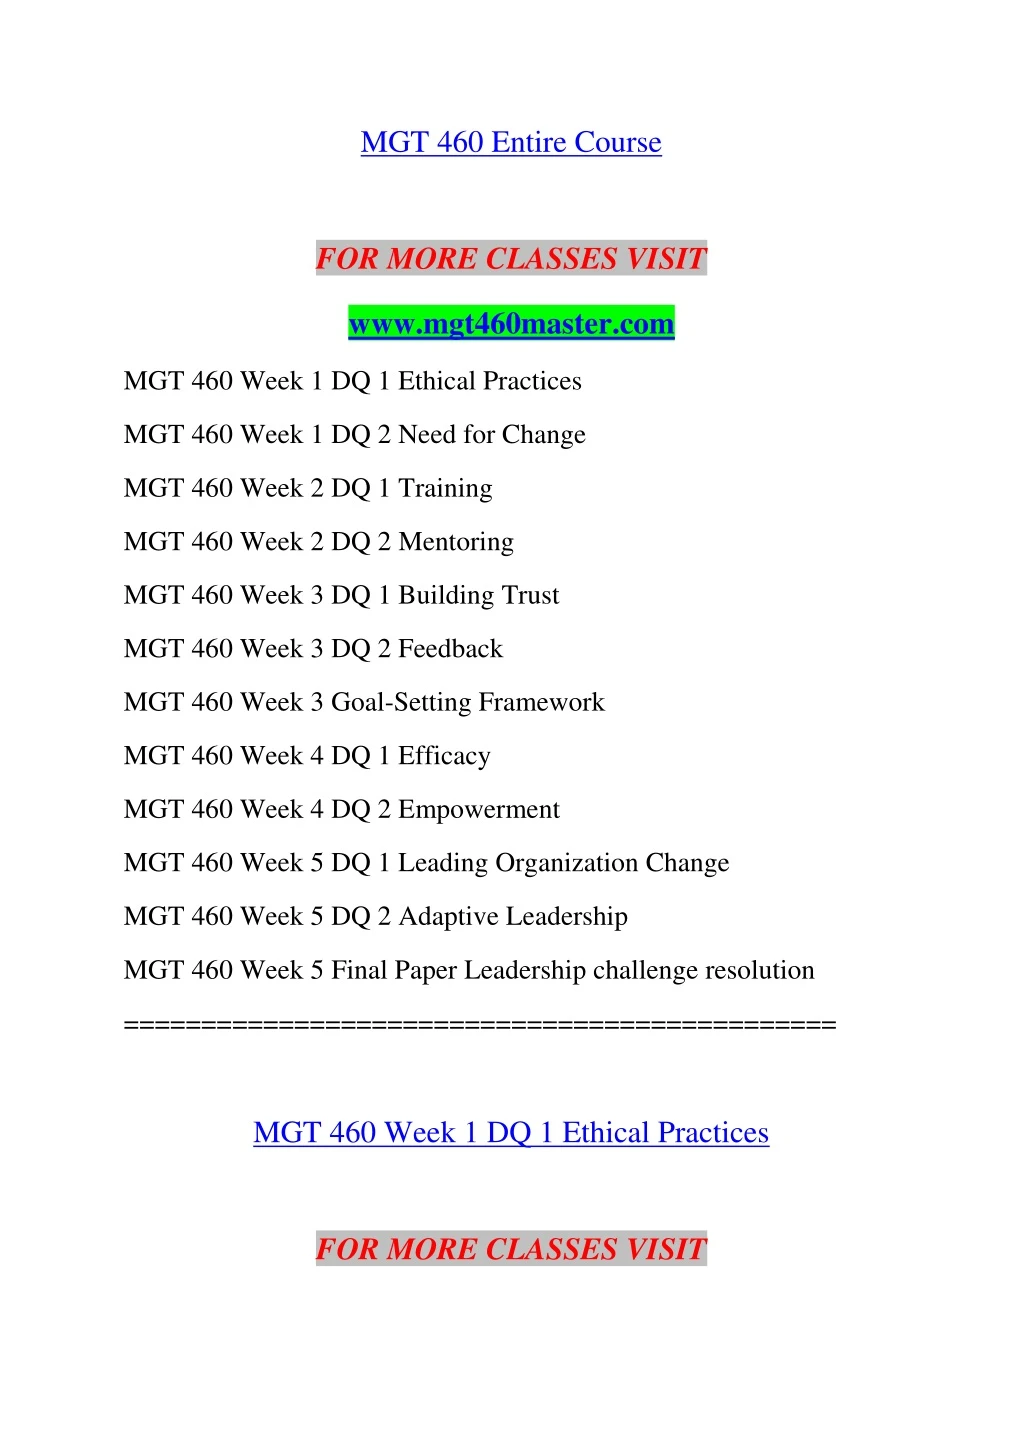 mgt 460 entire course